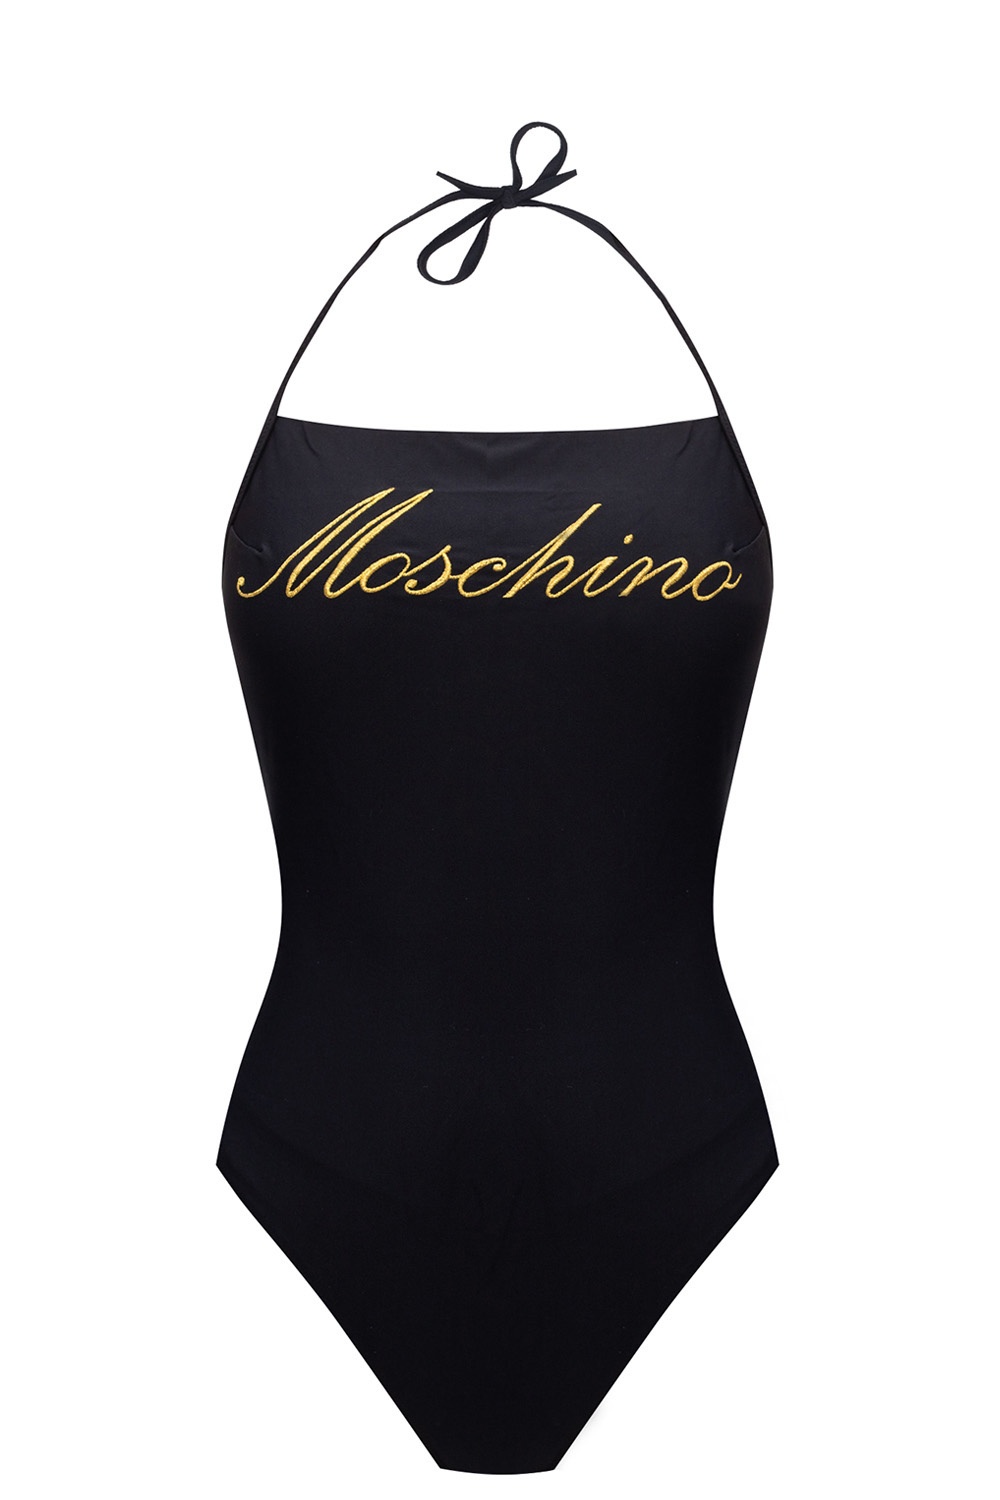 moschino one piece bathing suit